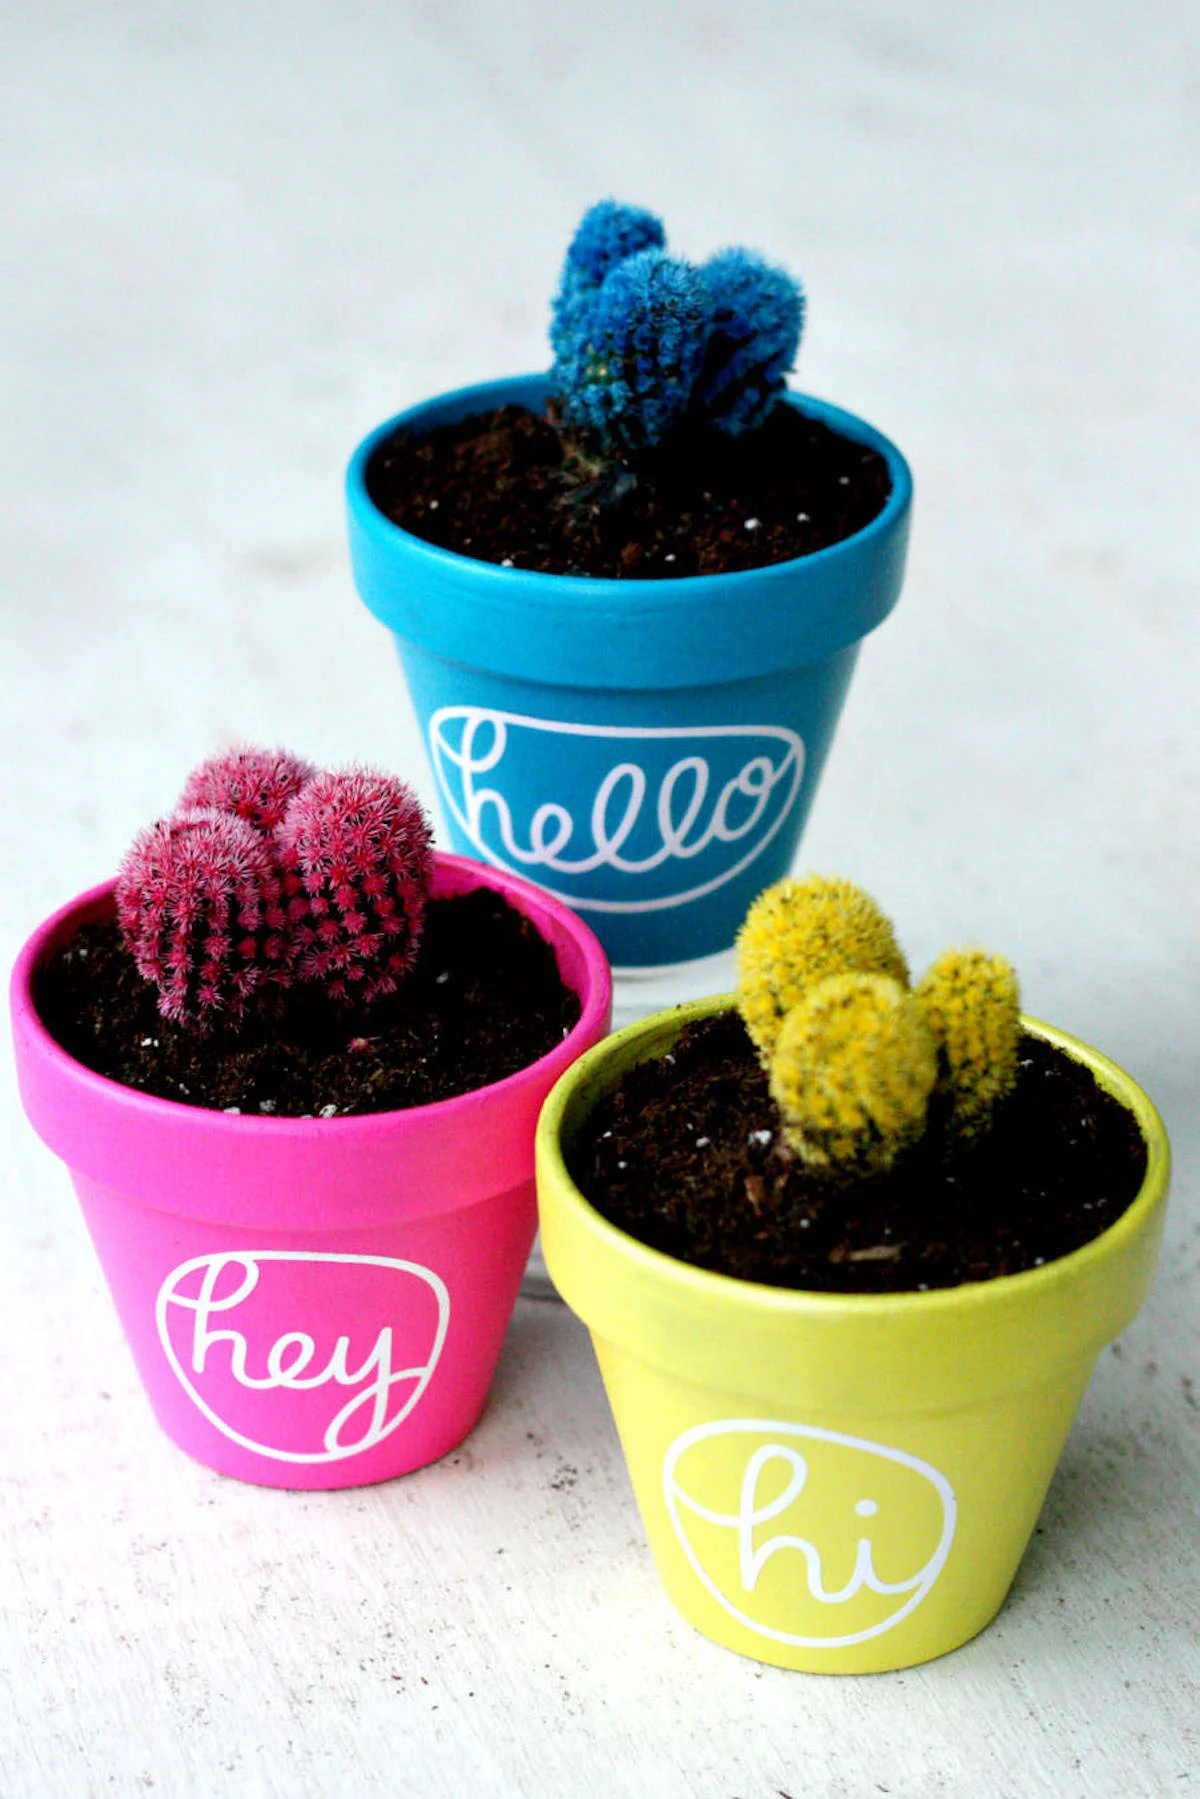 Painted clay pots that have colorful cacti planted in them